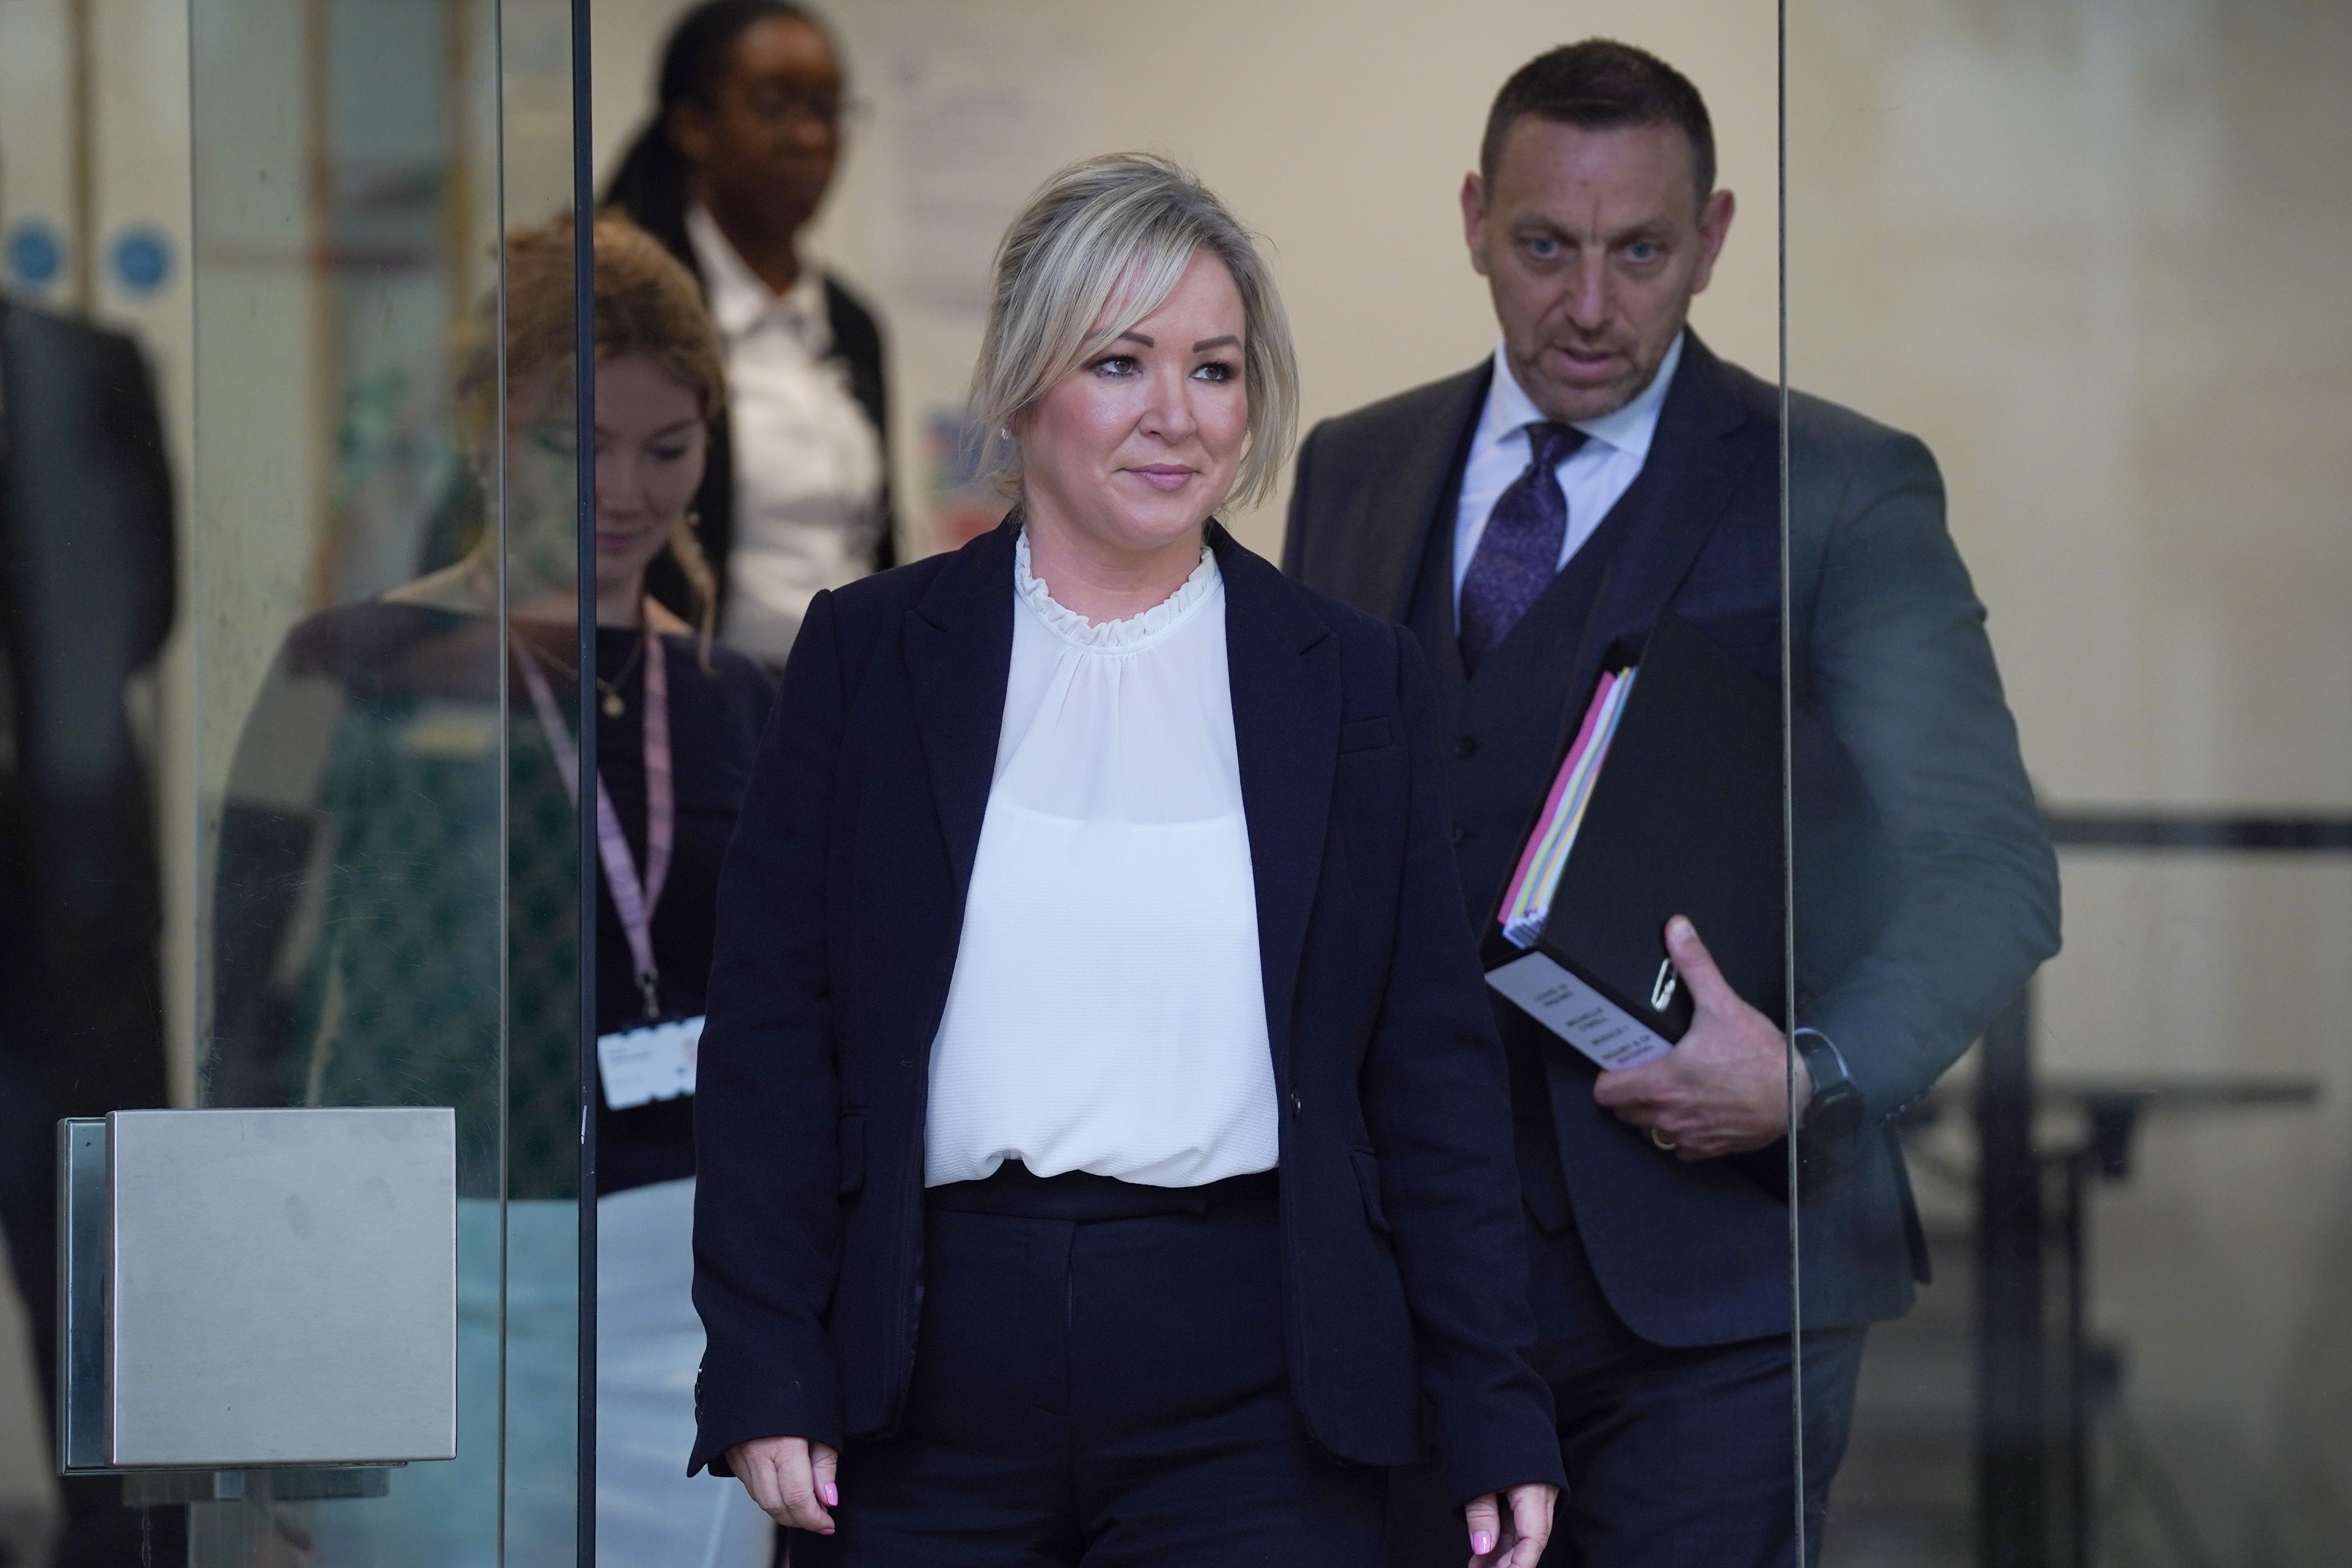 Michelle O’Neill, former deputy first minister of Northern Ireland, leaves after giving evidence to the UK Covid-19 Inquiry at Dorland House in London (Lucy North/PA)